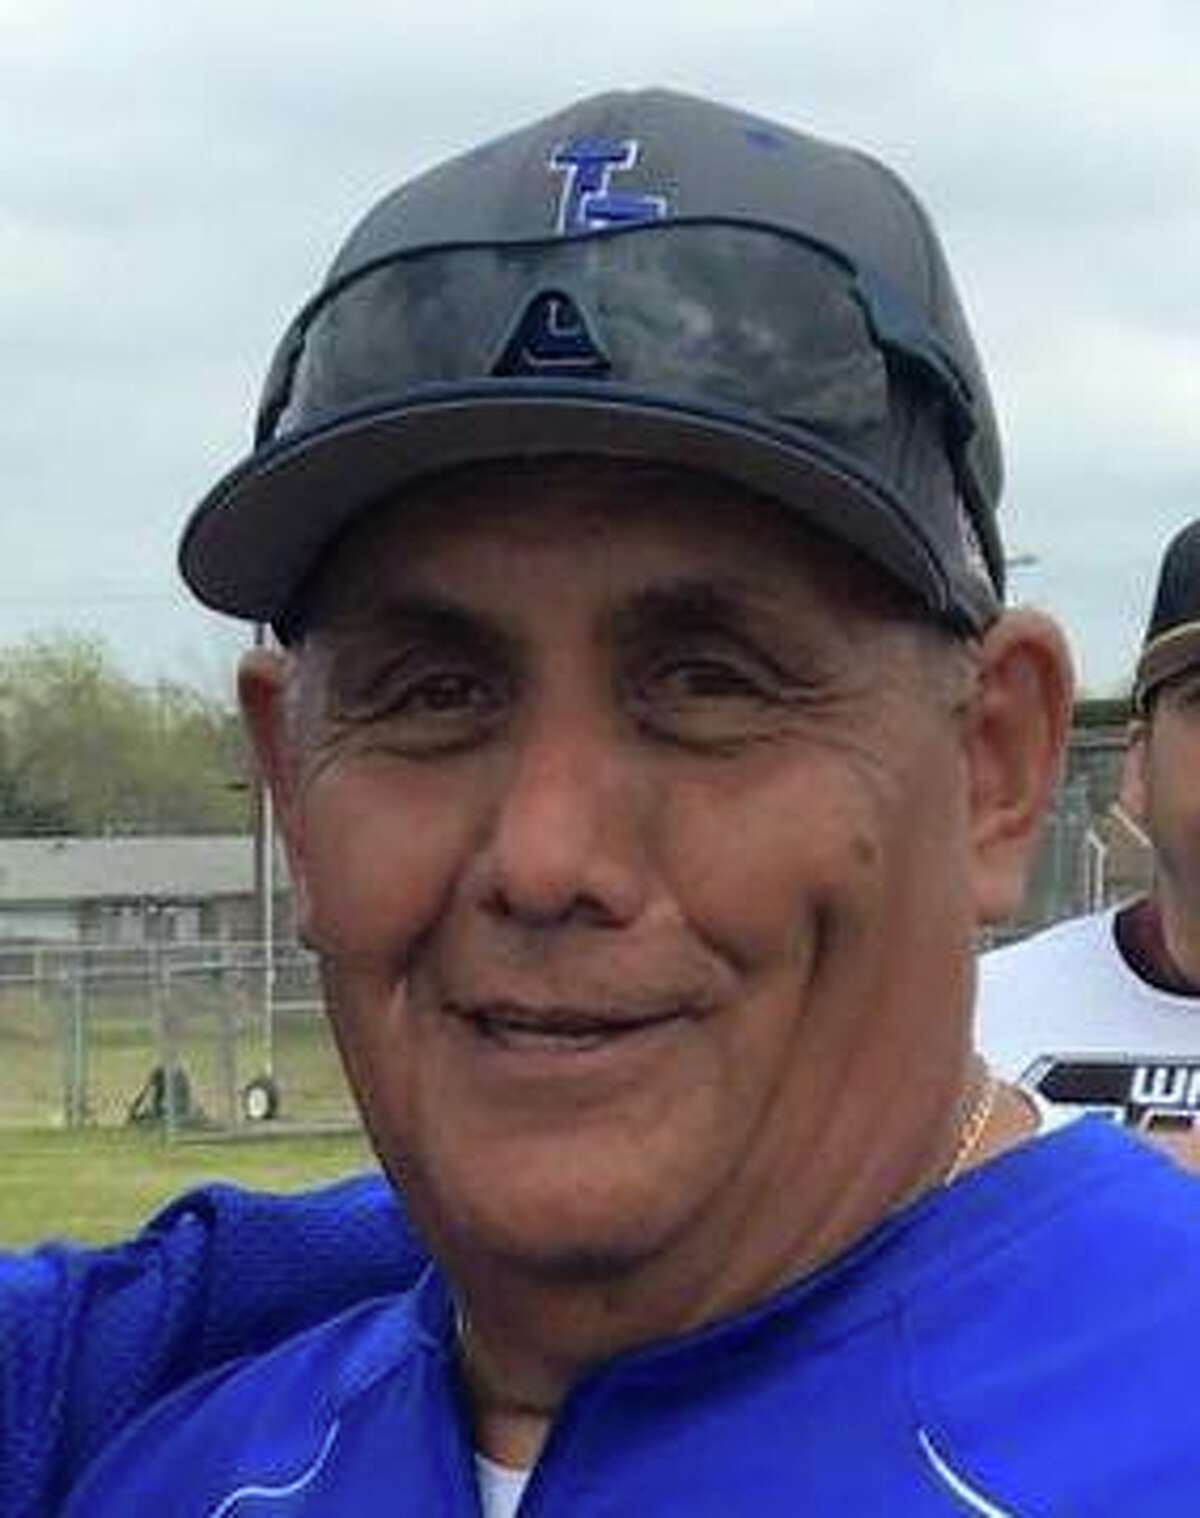 Jay in mourning after death of longtime baseball coach Campos